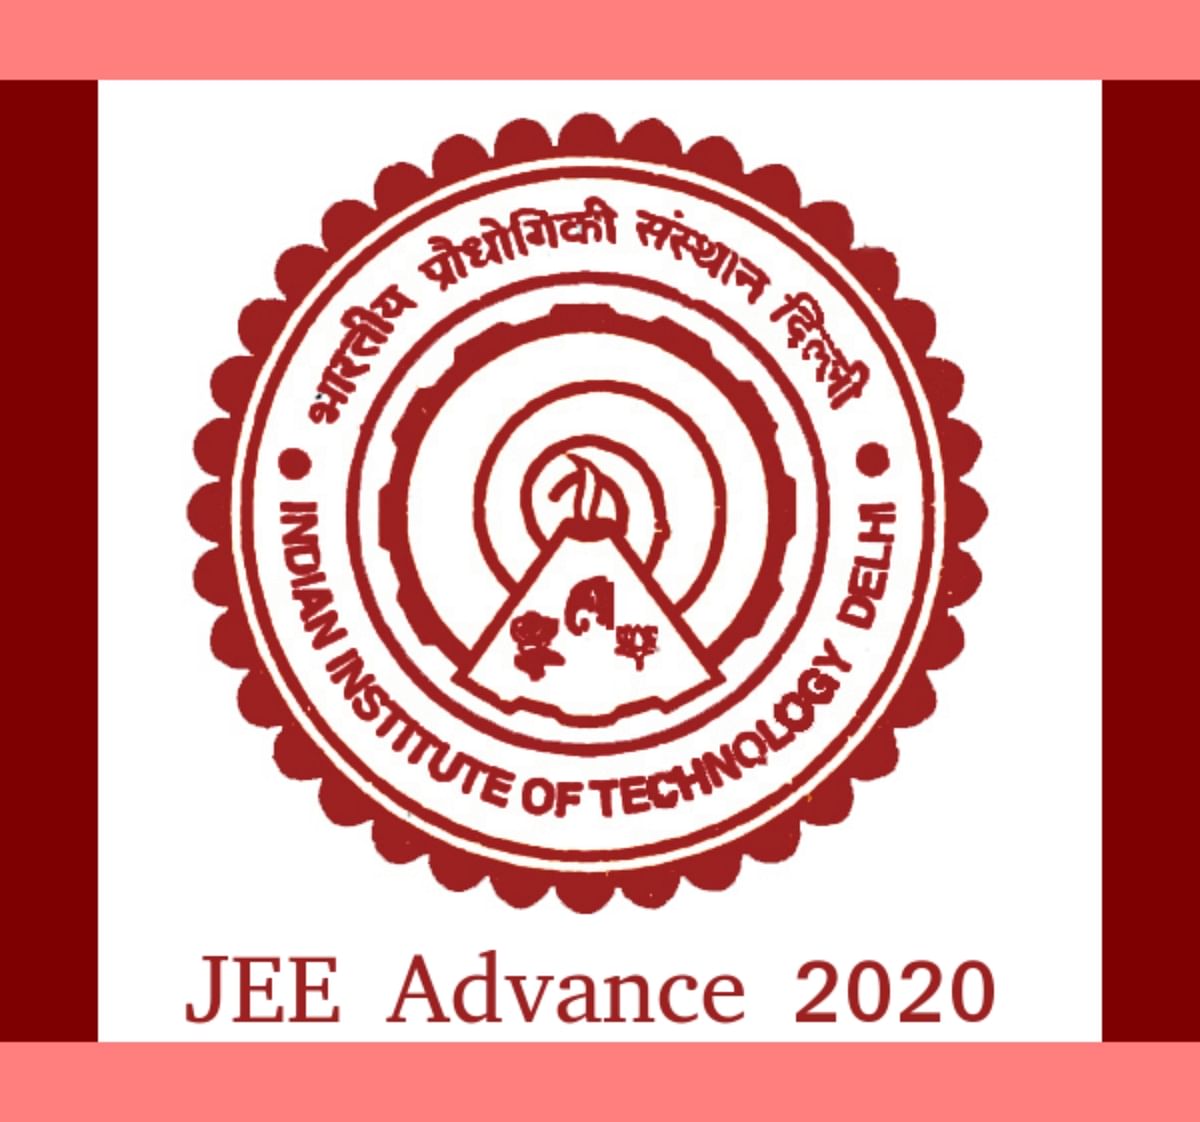 COVID-19: JEE Advance 2020 Postponed, New Dates to be Announced Soon